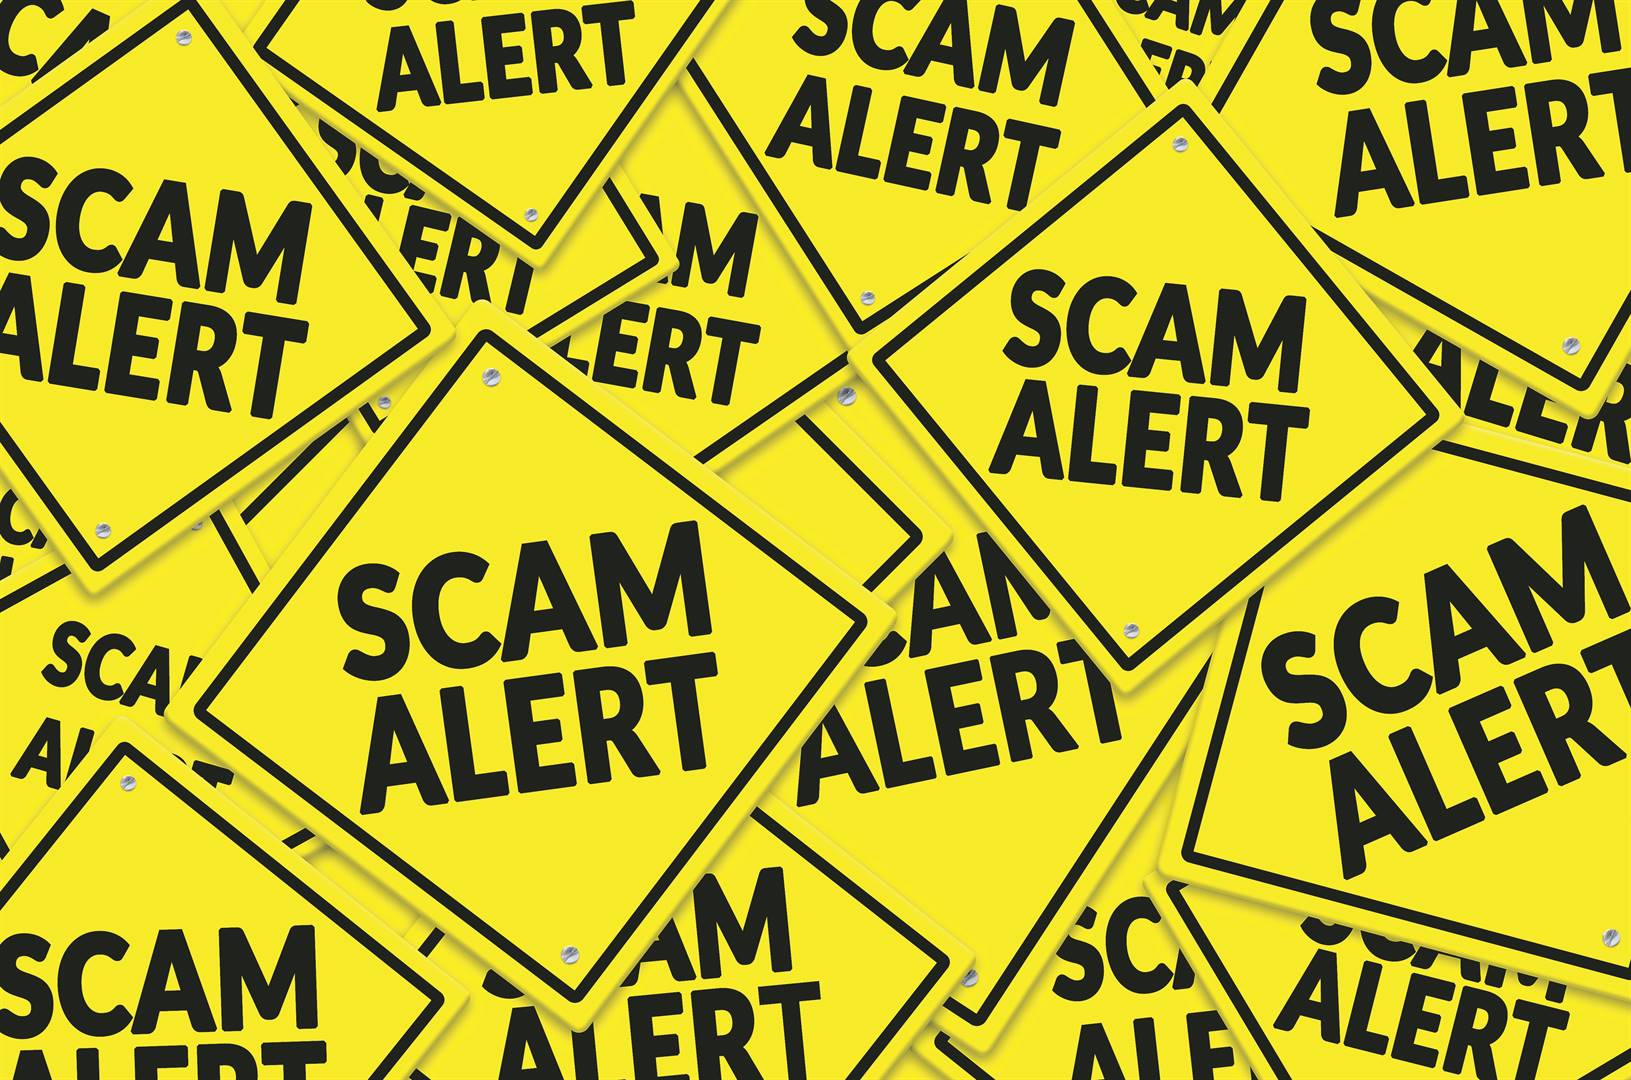 The tricks involve SMS and email scams claiming that you must follow prompts to avoid your crypto wallet being locked. Photo: Archive 